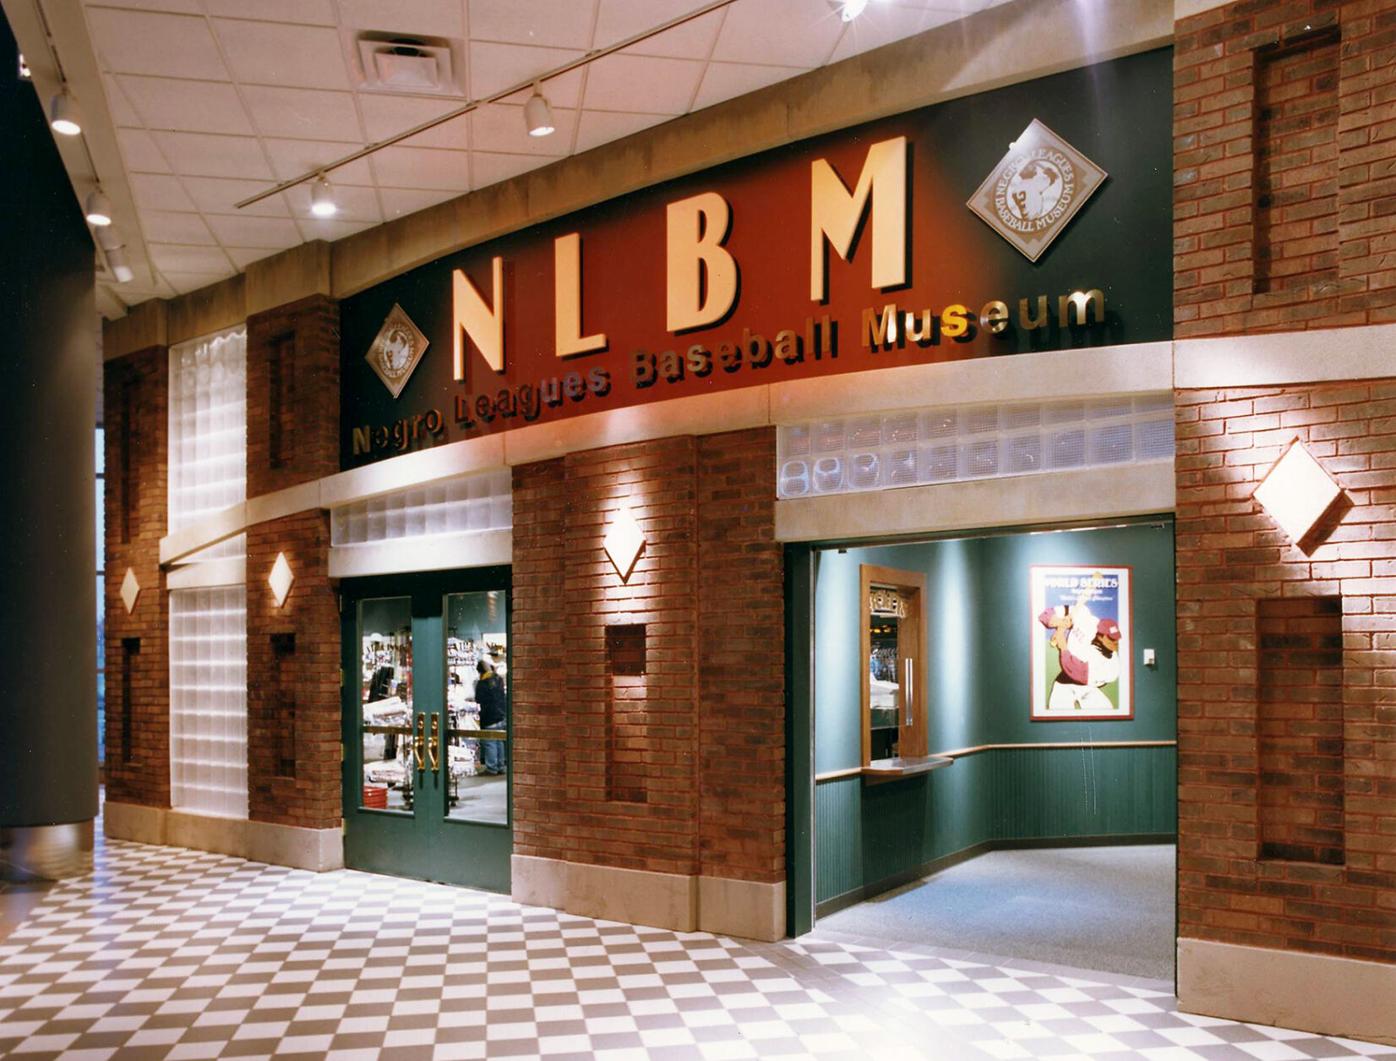 Welcome to NLBM - Negro Leagues Baseball Museum